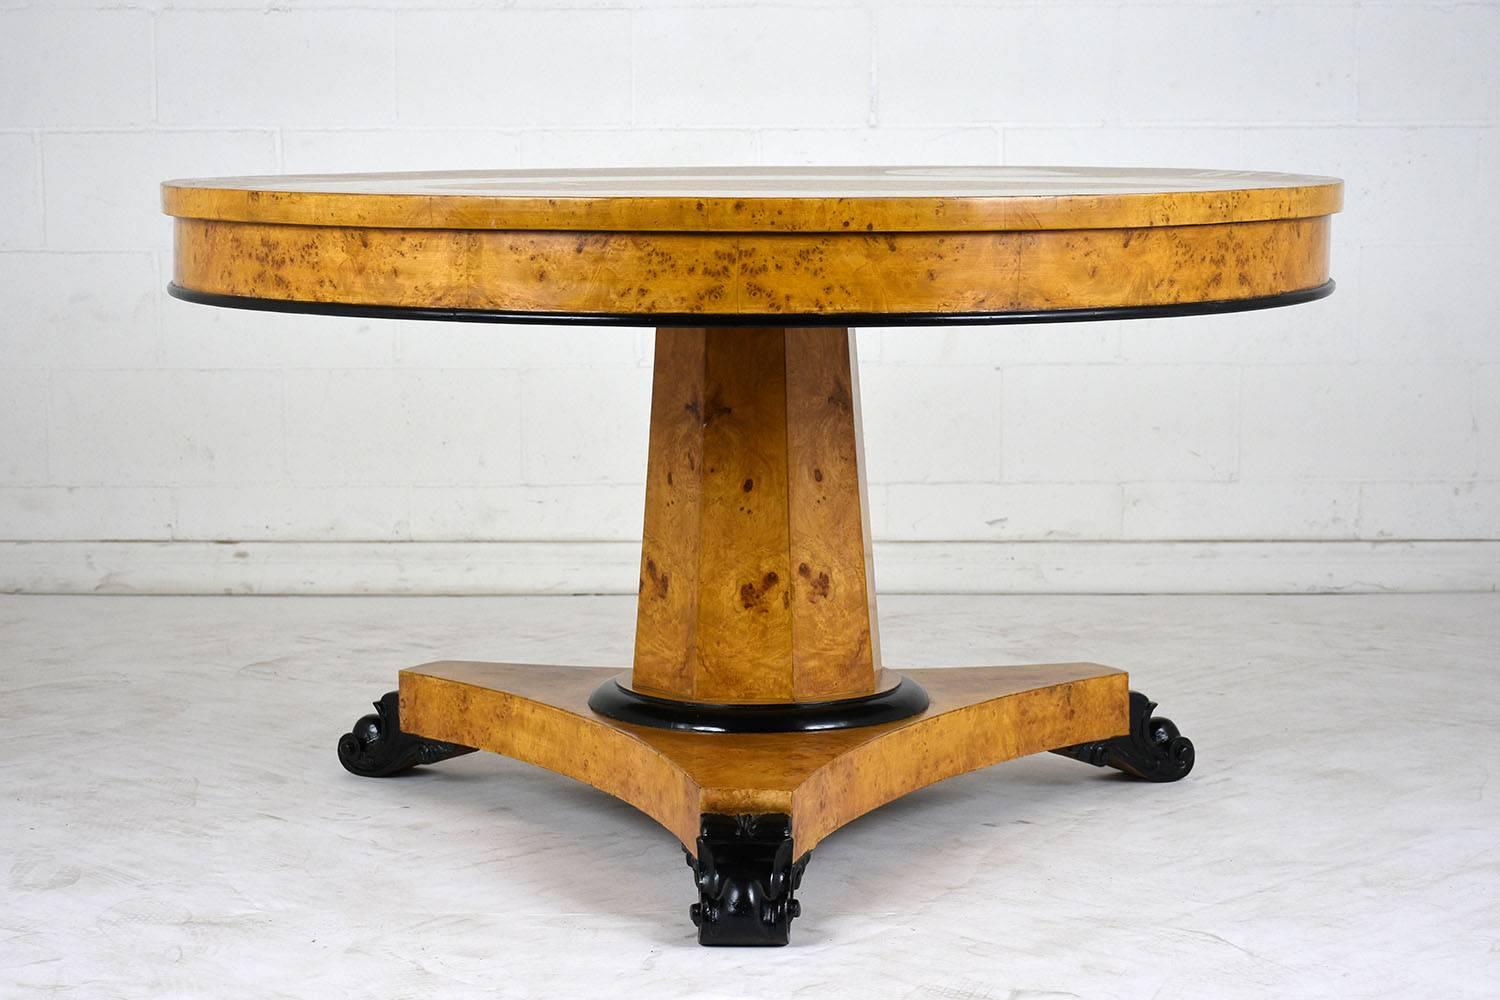 This Vintage French Empire Center Table has been newly restored, is adorned with a burled wood veneers stained a stunning golden color with ebonized details and newly lacquered finish. Accenting the edge of the table and the pedestal are black